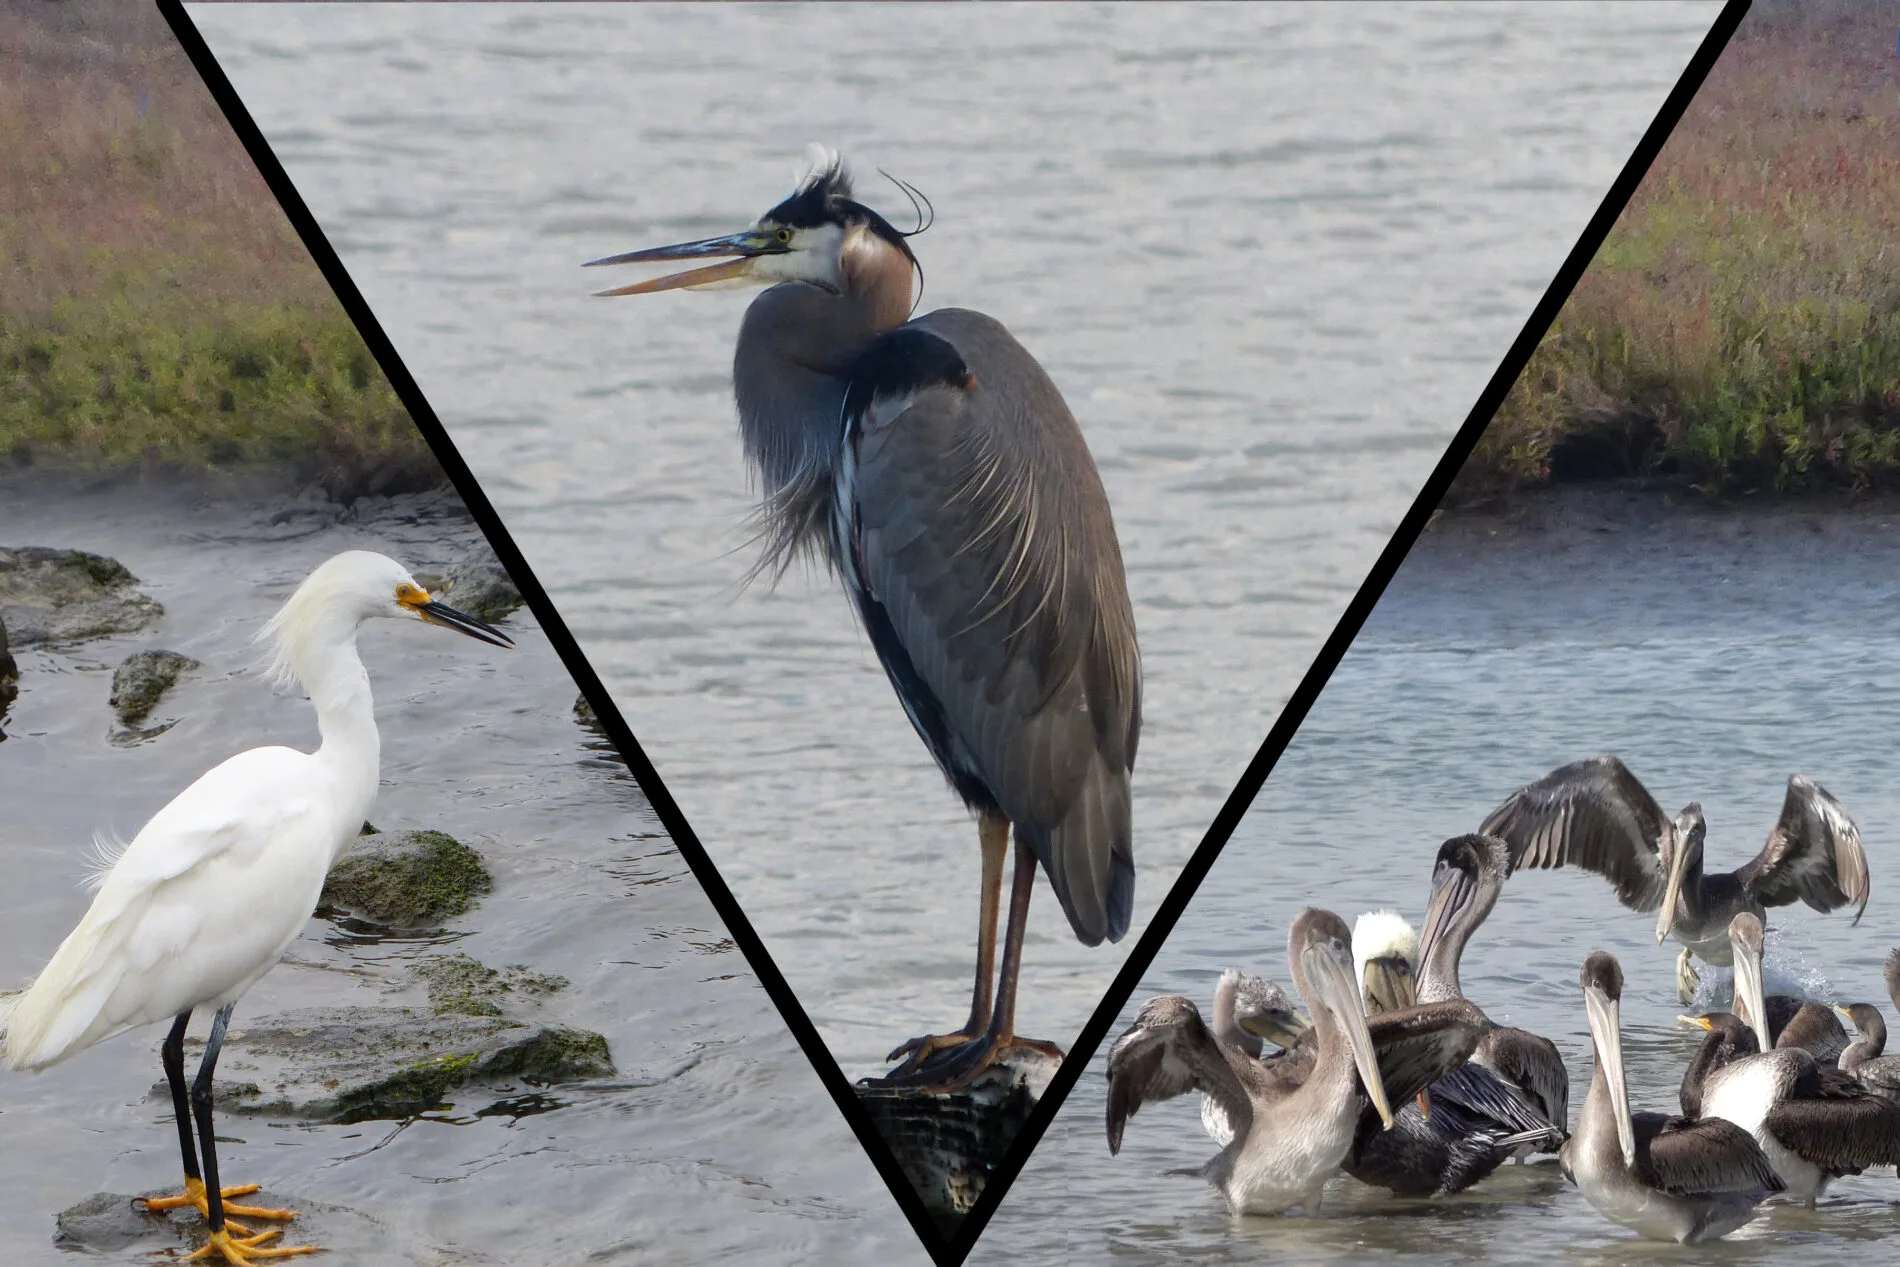 Crissy Marsh bird photos including a Snowy Egret, a Blue Heron, and Brown Pelicans.